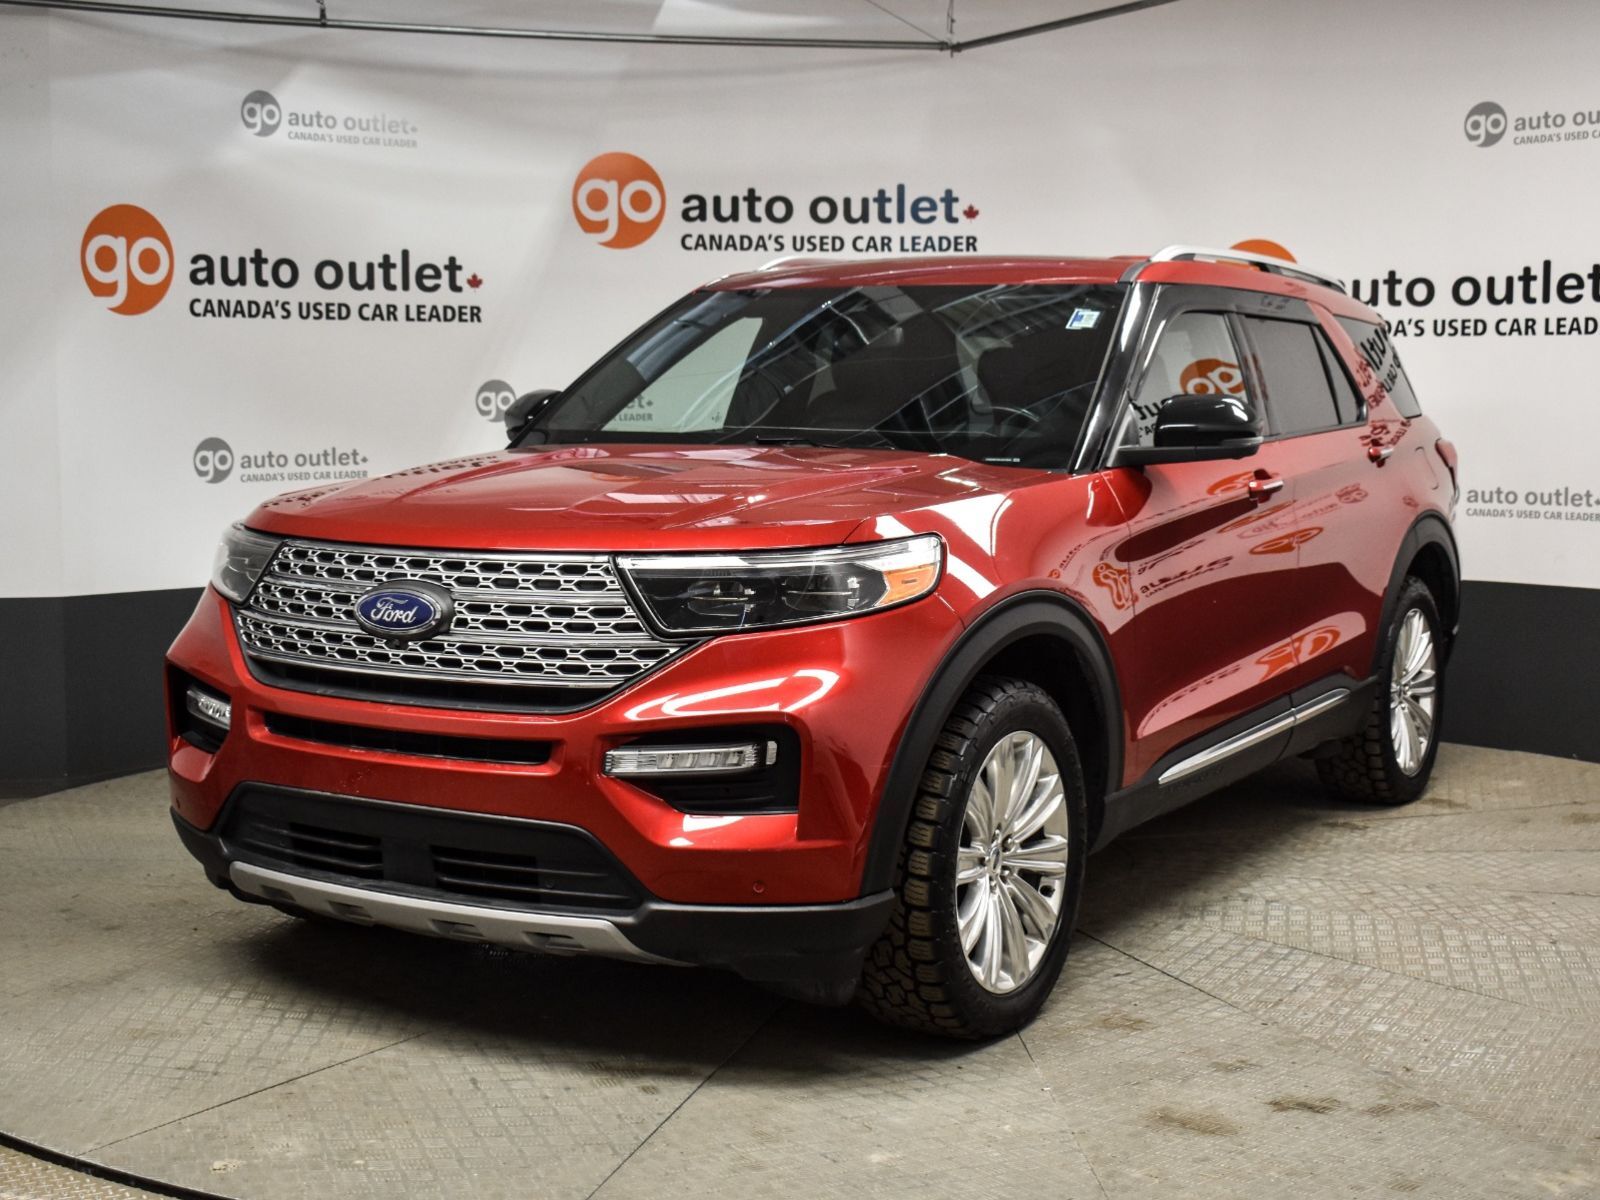 2020 Ford Explorer Limited 4WD Navi Heated Leather Seats Sunroof